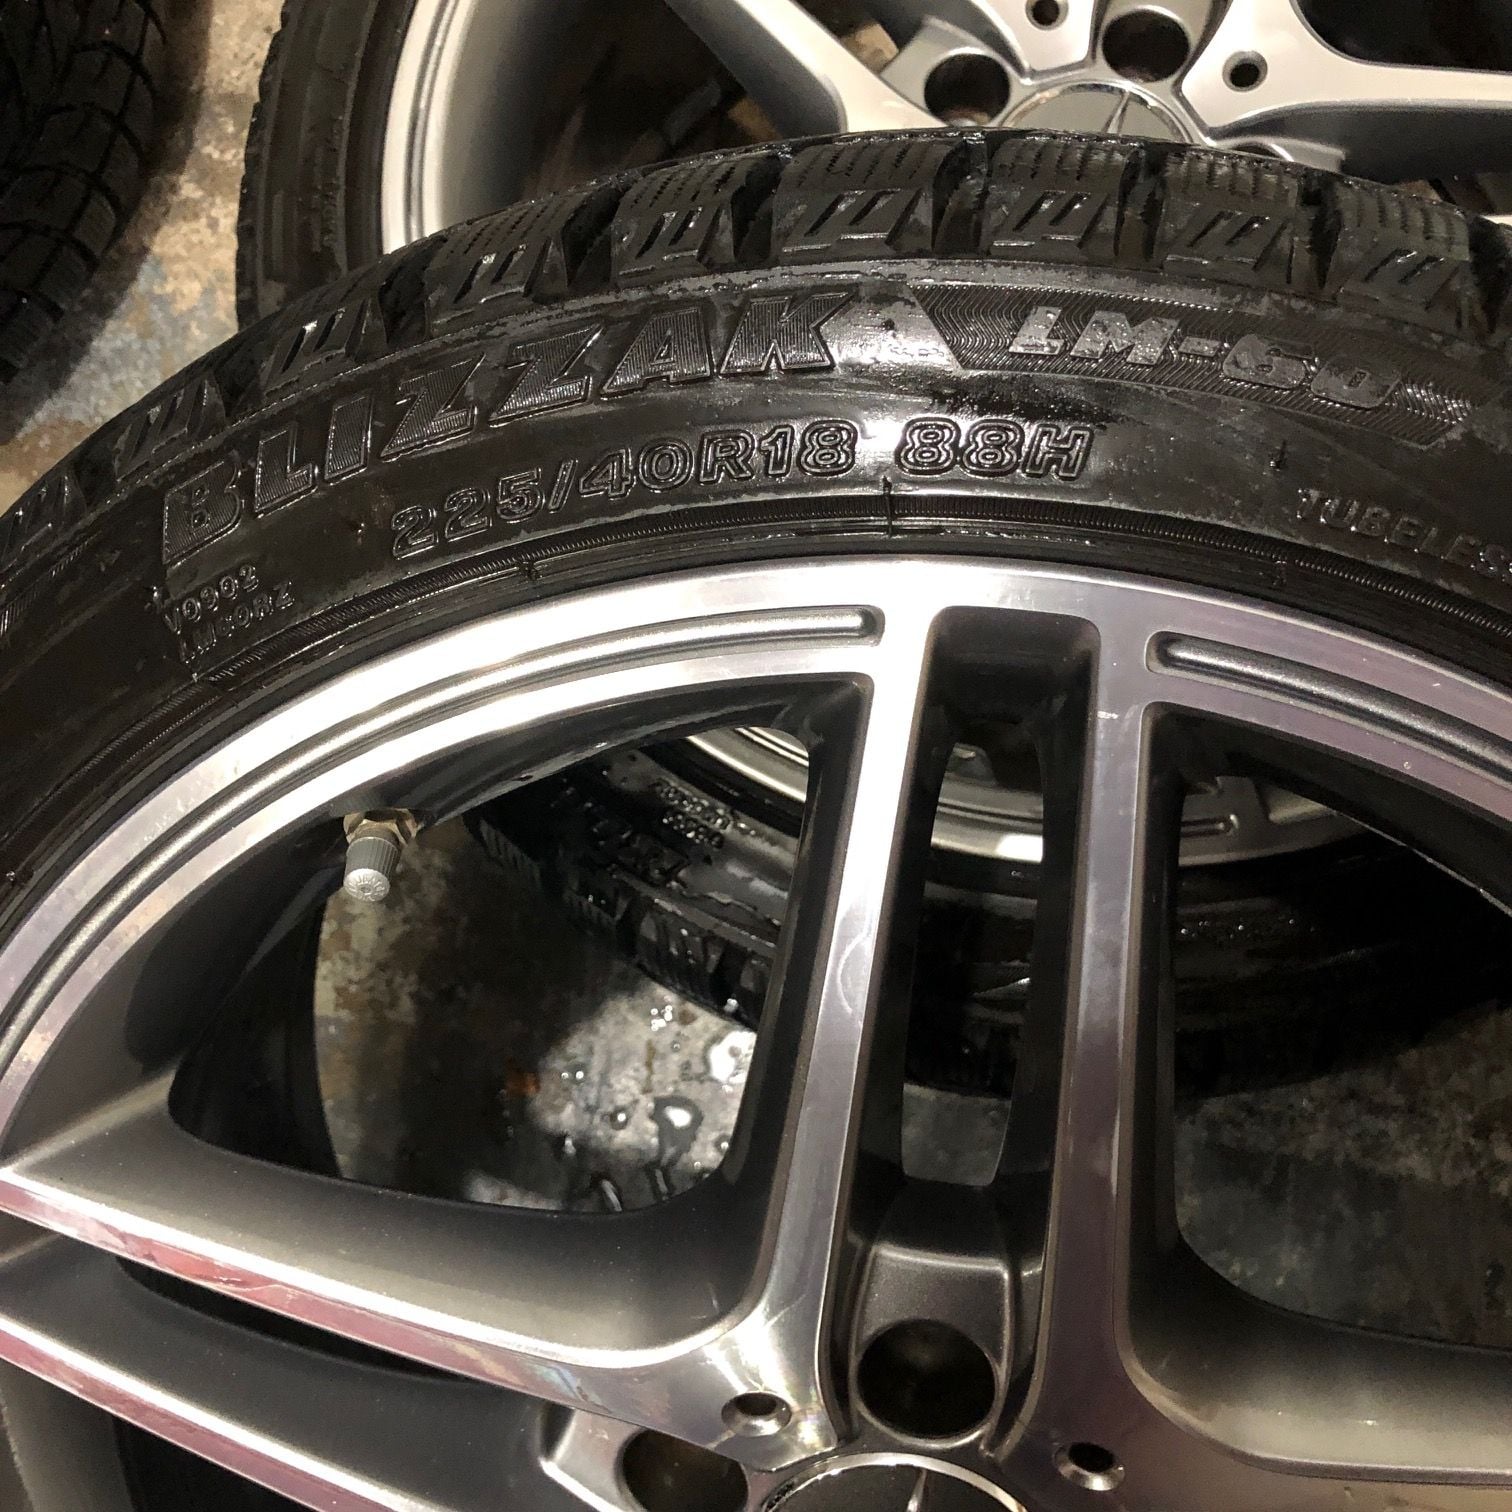 Wheels and Tires/Axles - W204 Mercedes Benz Wheels AMG & Blizzak LM60 Run Flat Winter Tires 235/40/18 - Used - 2008 to 2014 Mercedes-Benz C63 AMG - Enfield, CT 06083, United States